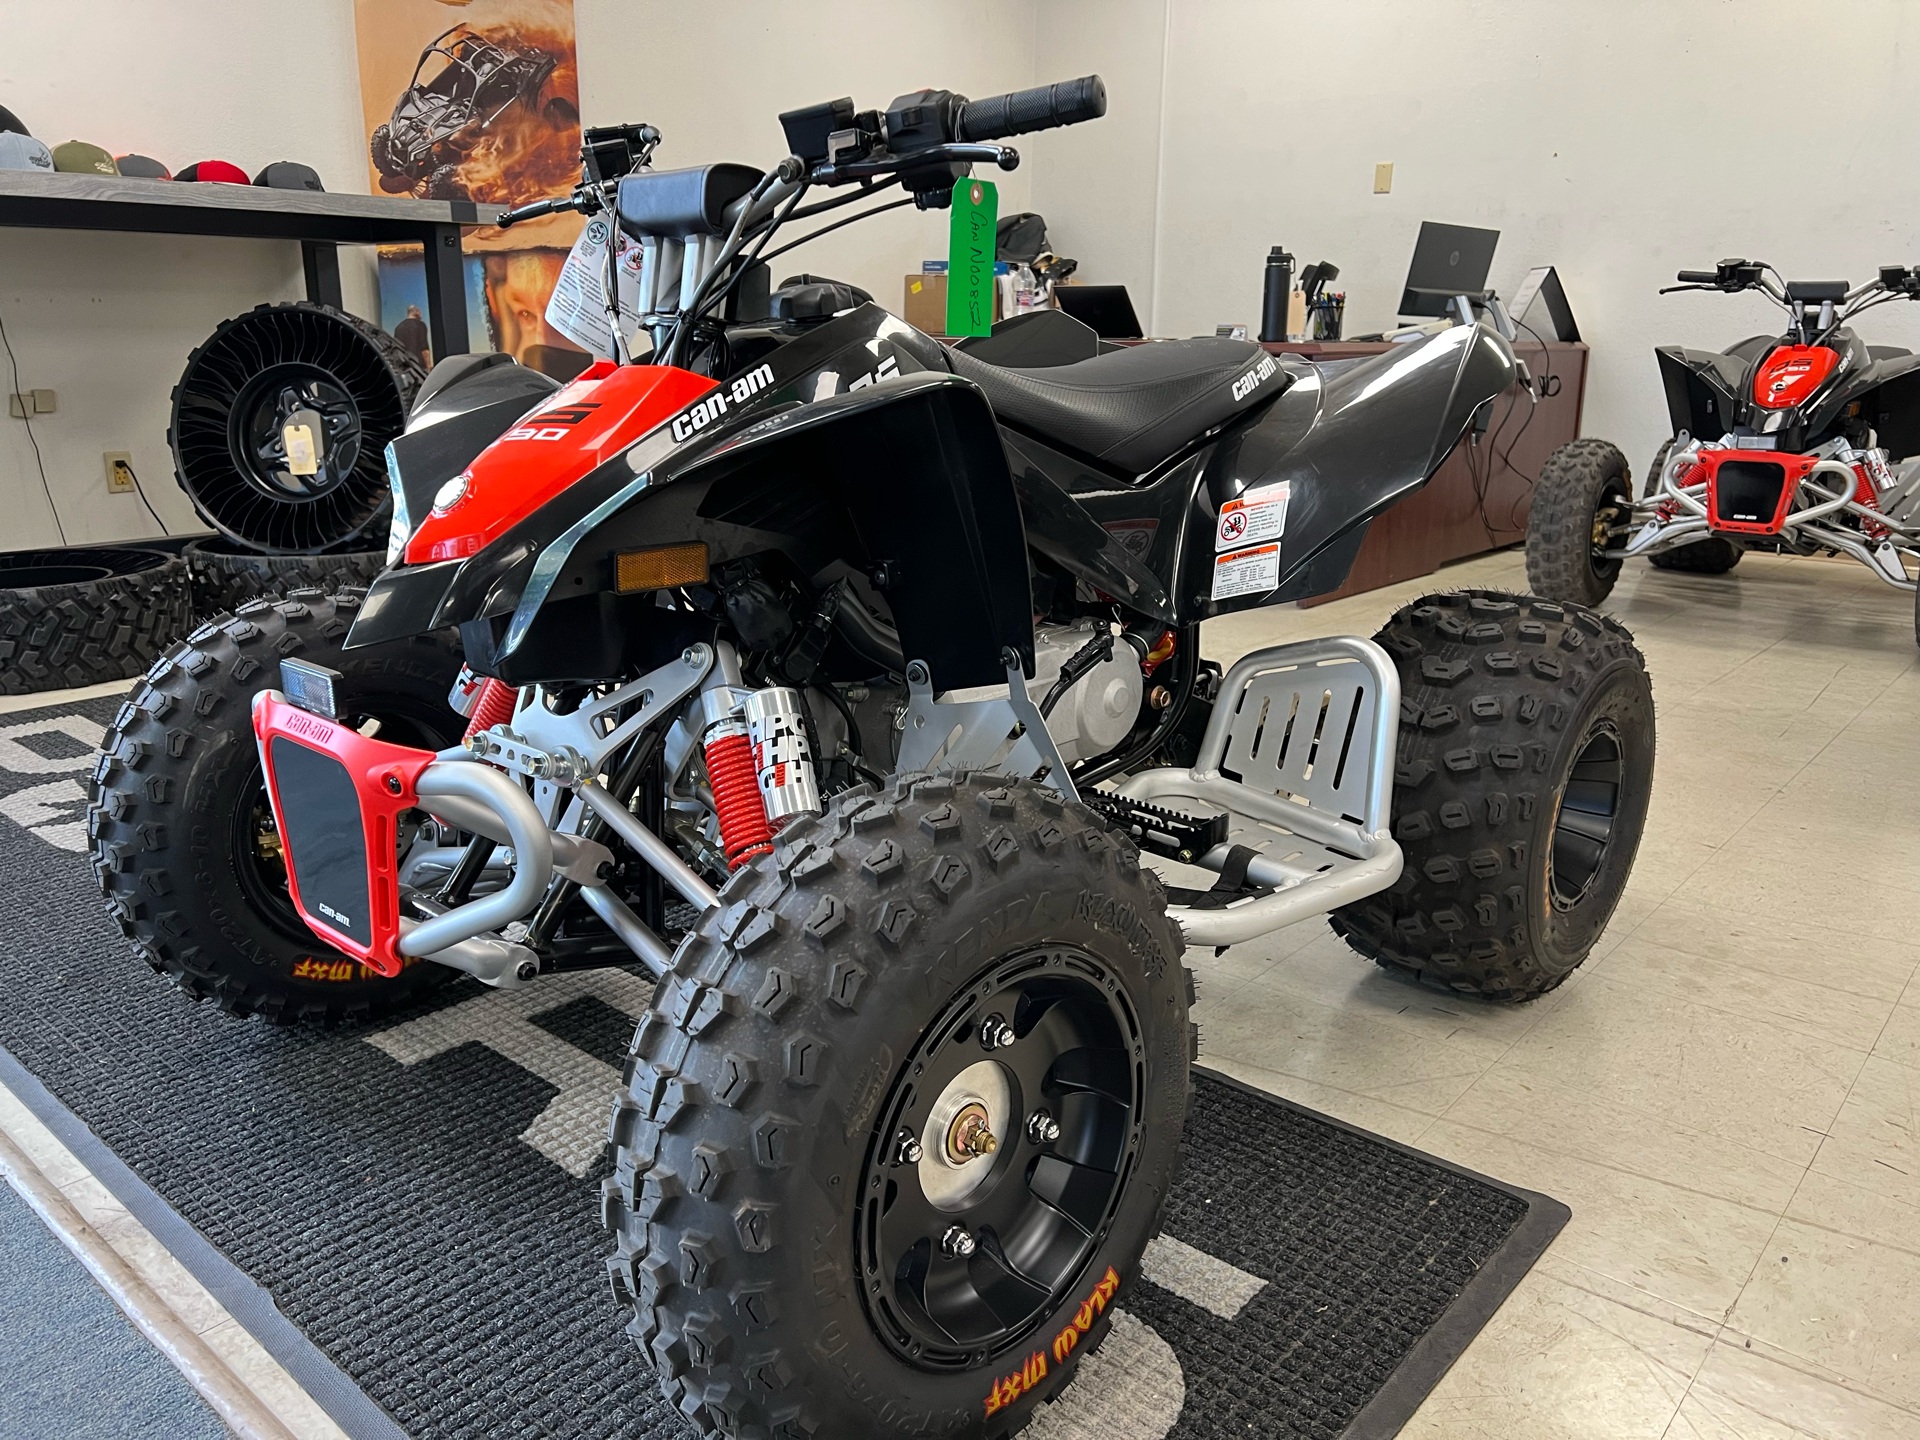 2022 Can-Am DS 90 X in Huntsville, Texas - Photo 1